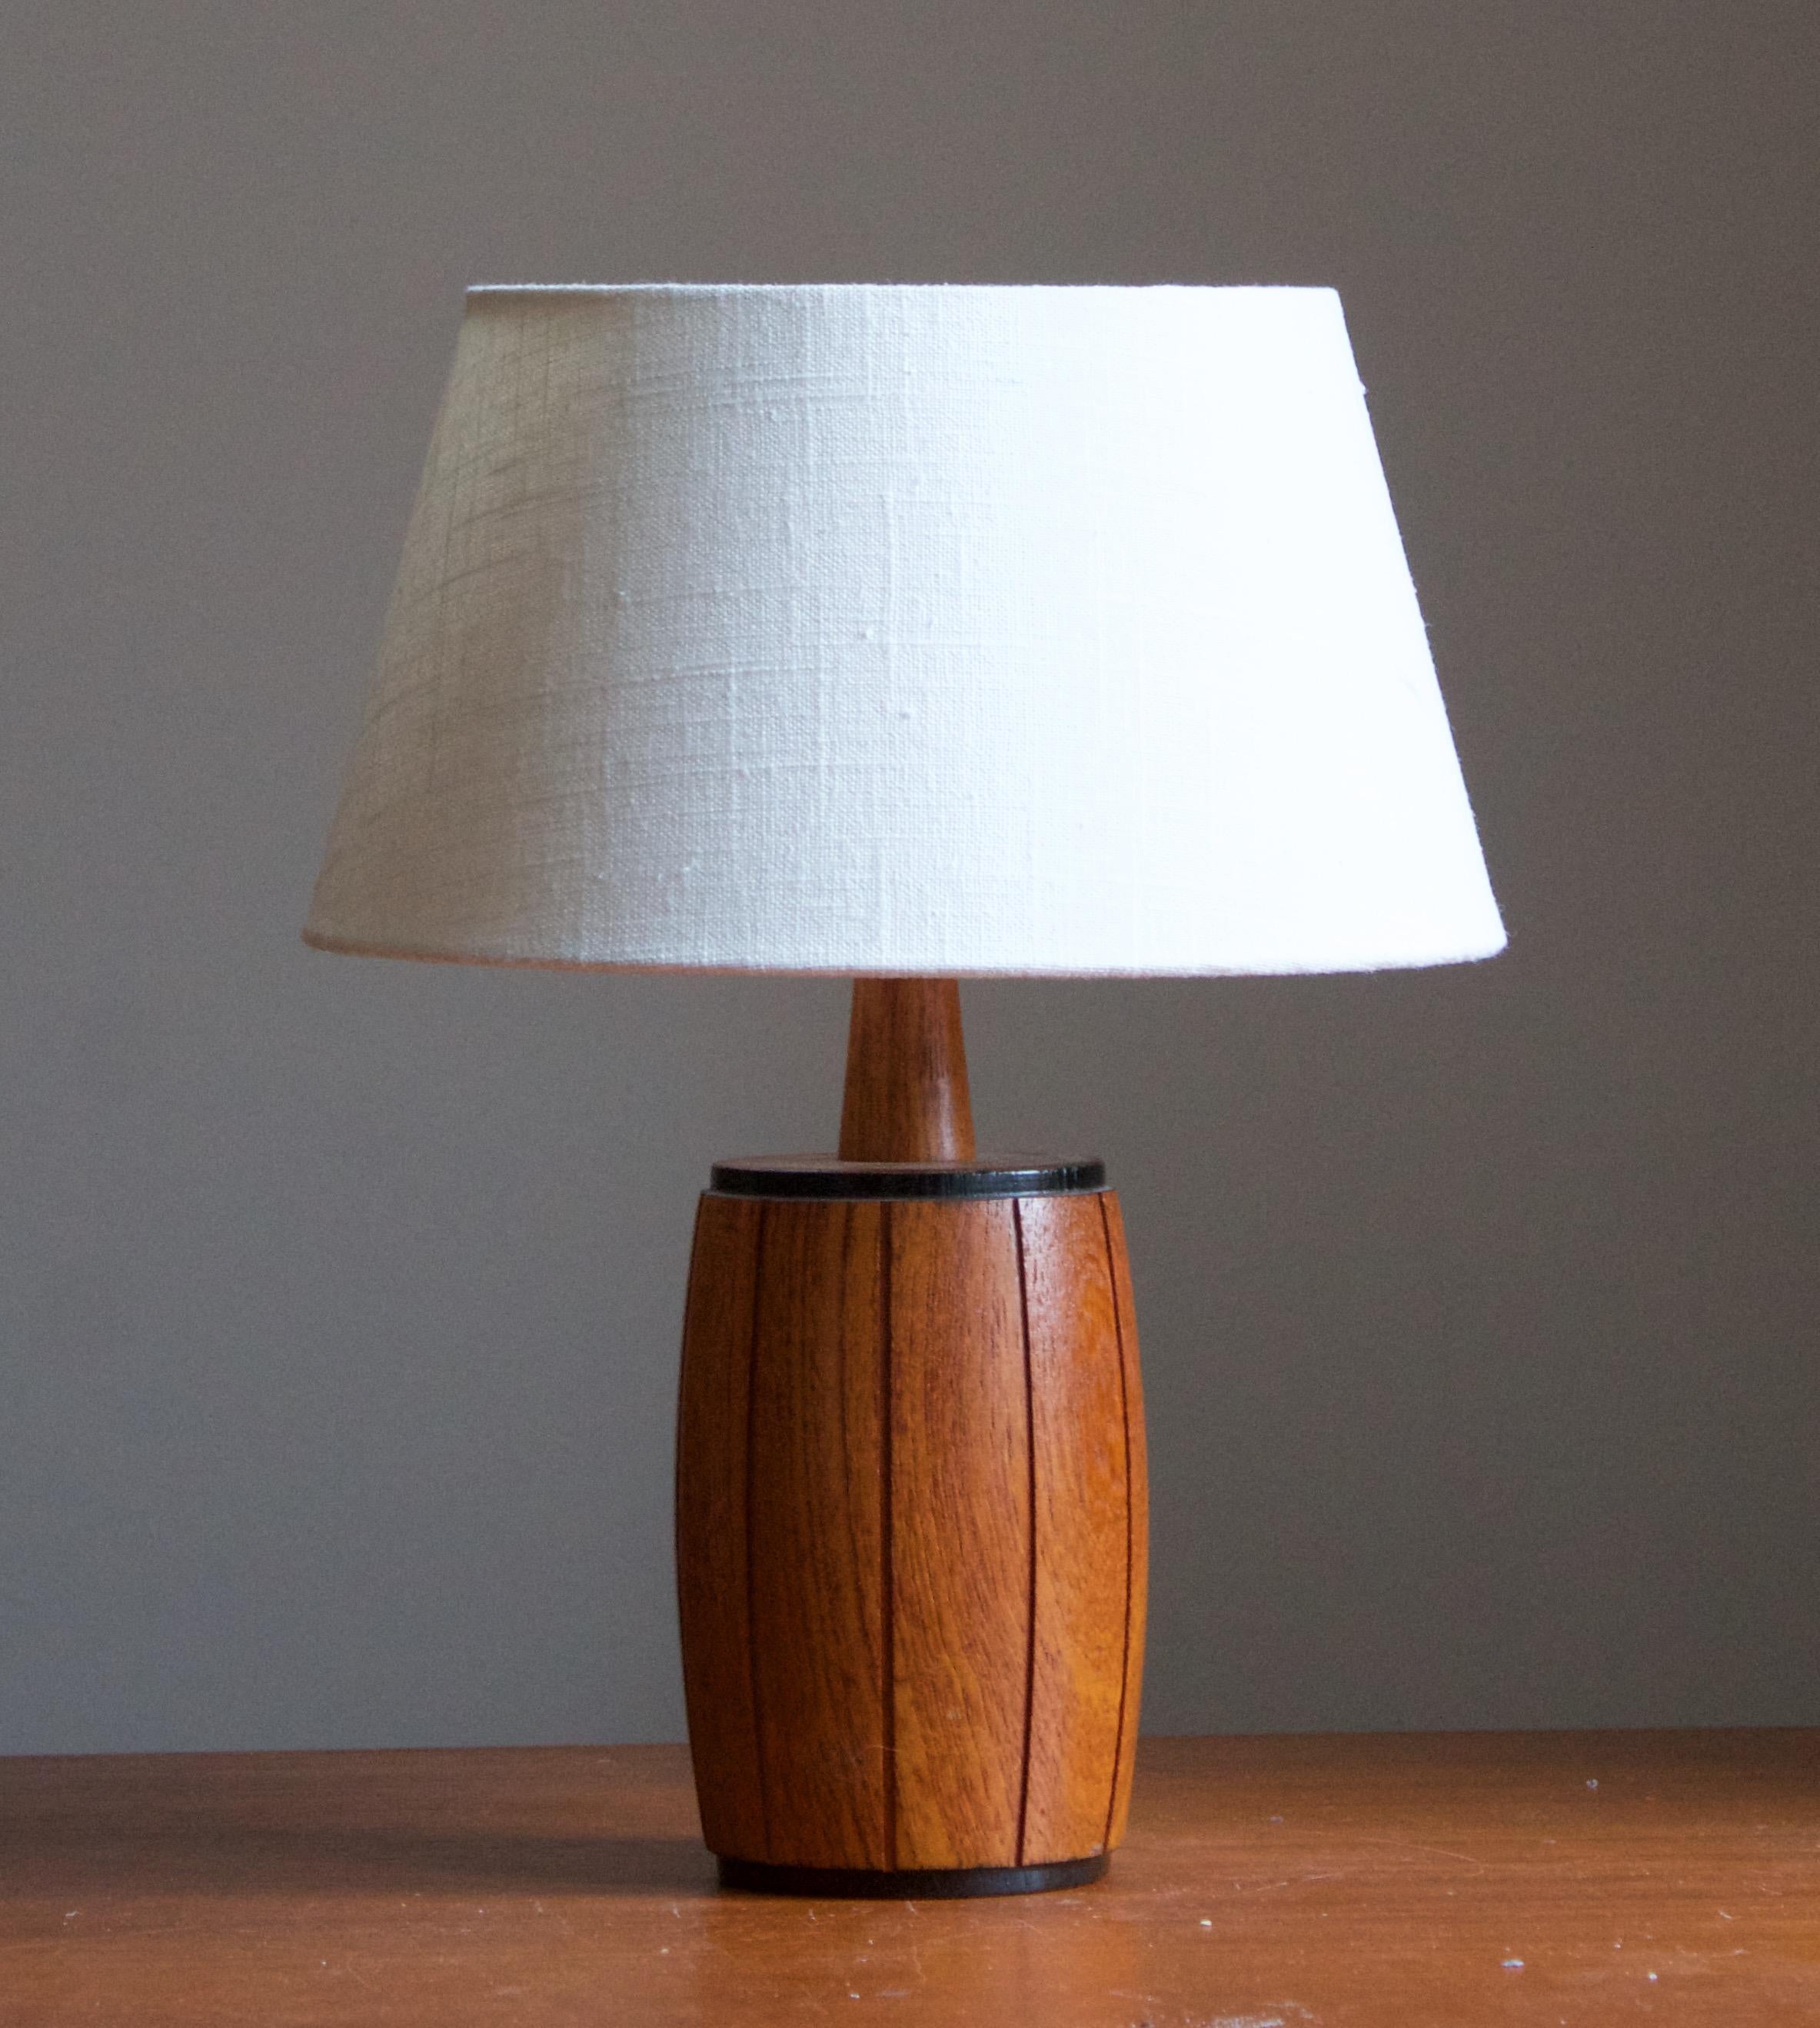 A table lamp. In solid turned teak. By unknown Swedish designer and producer, c. 1960s.

Stated dimensions exclude lampshade, height includes the socket. Sold without lampshade.